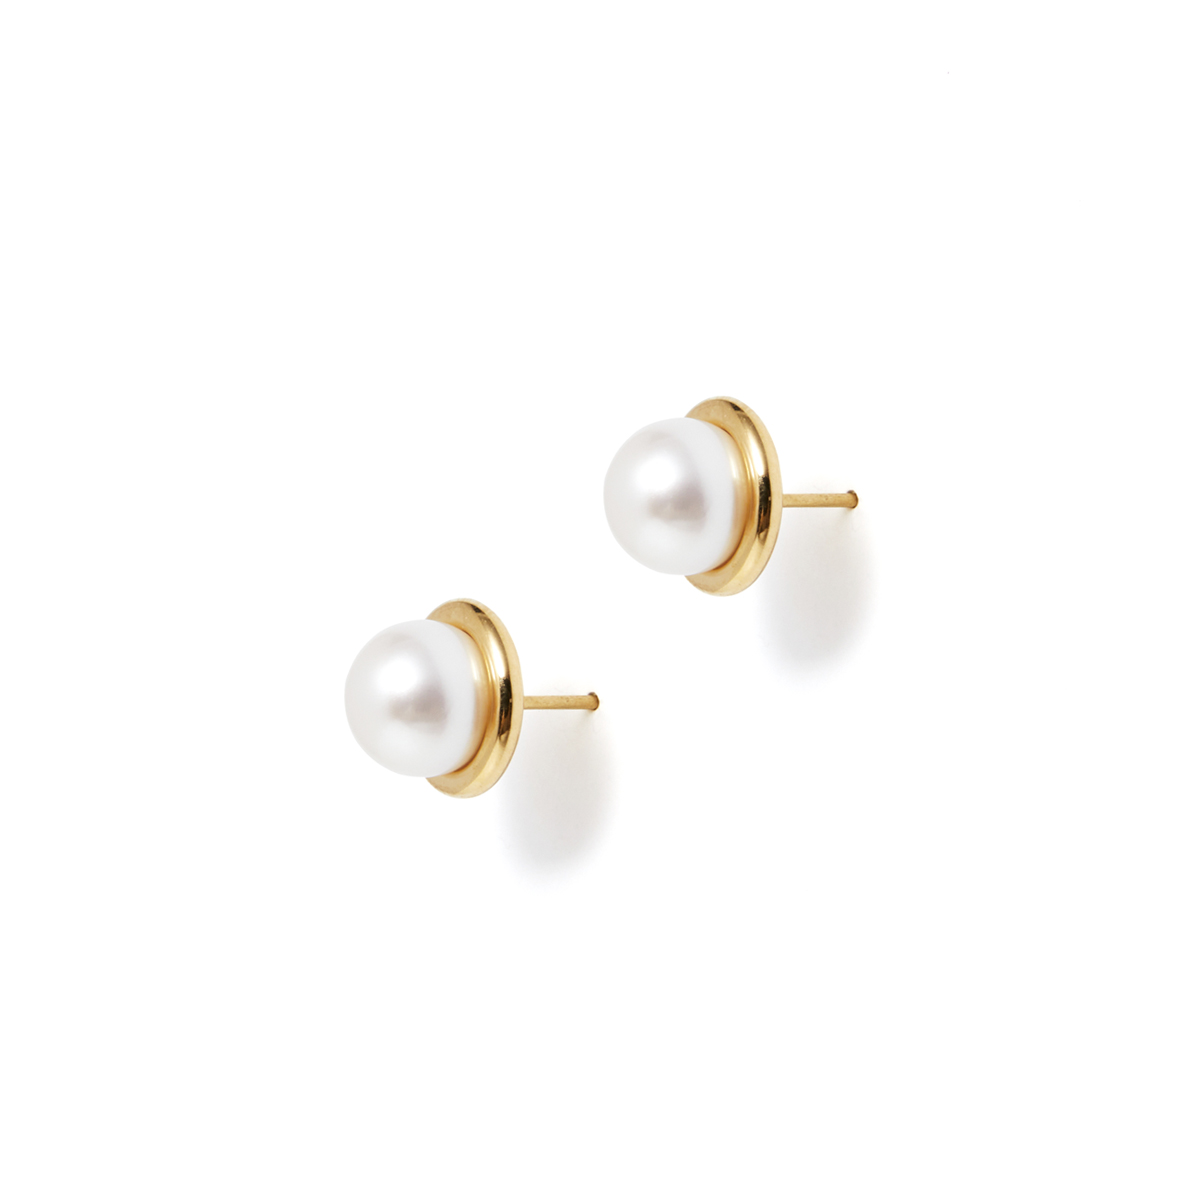 COLD WHITE 8mm PEARL GOLD EARRINGS